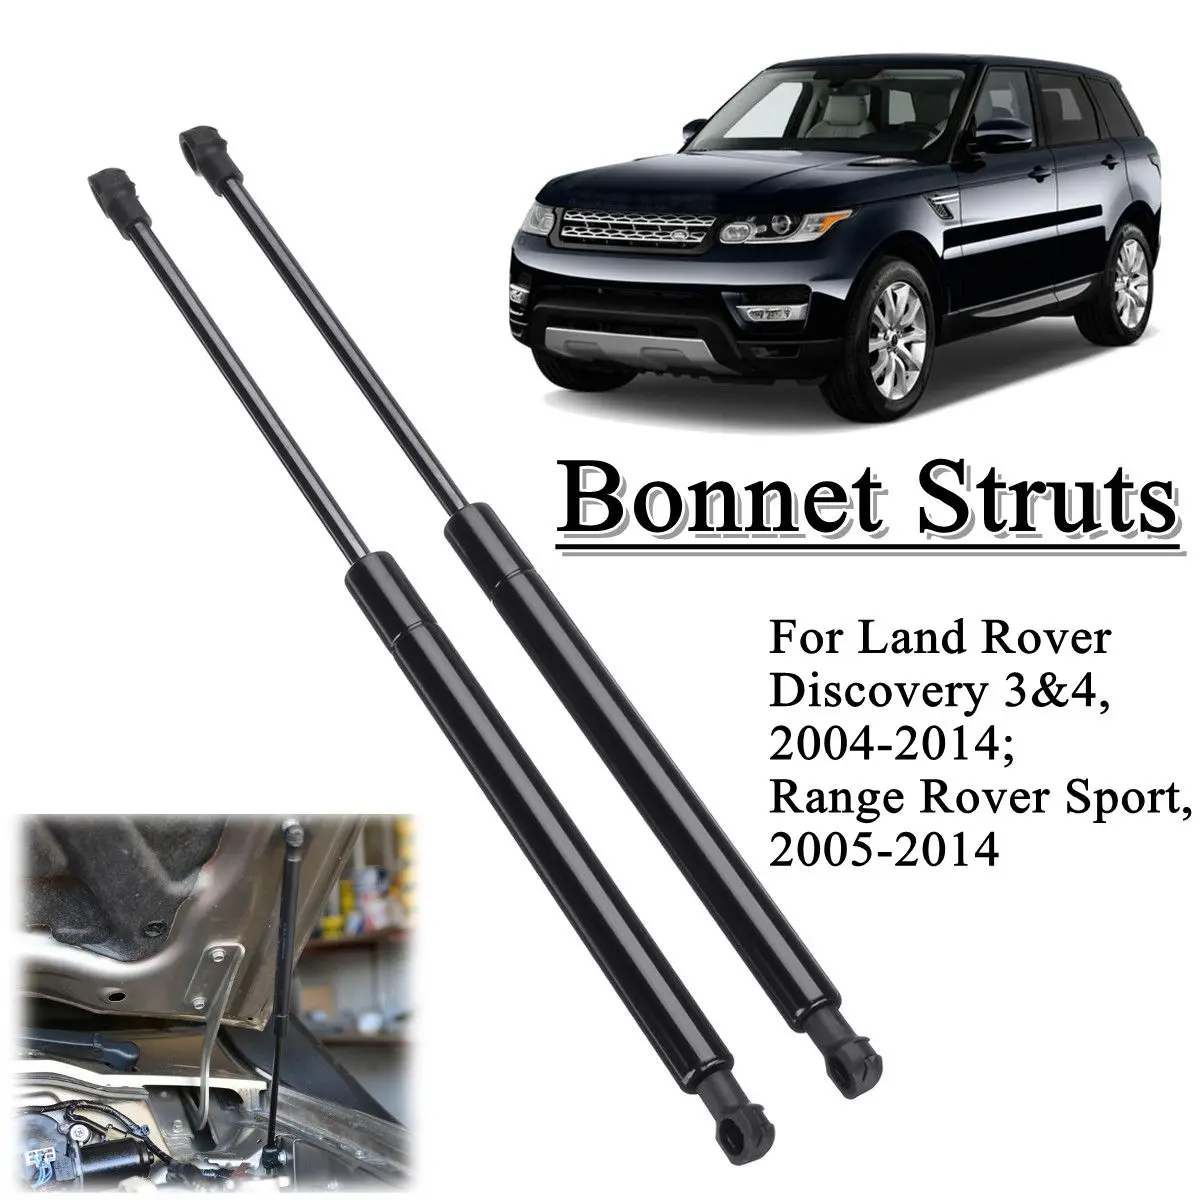 

Car Bonnet Hood Gas Spring Strut Lift Support LR009106 SG387004 for LAND ROVER LR3 LR4 Discovery 3 Discovery 4 Range Rover Sport